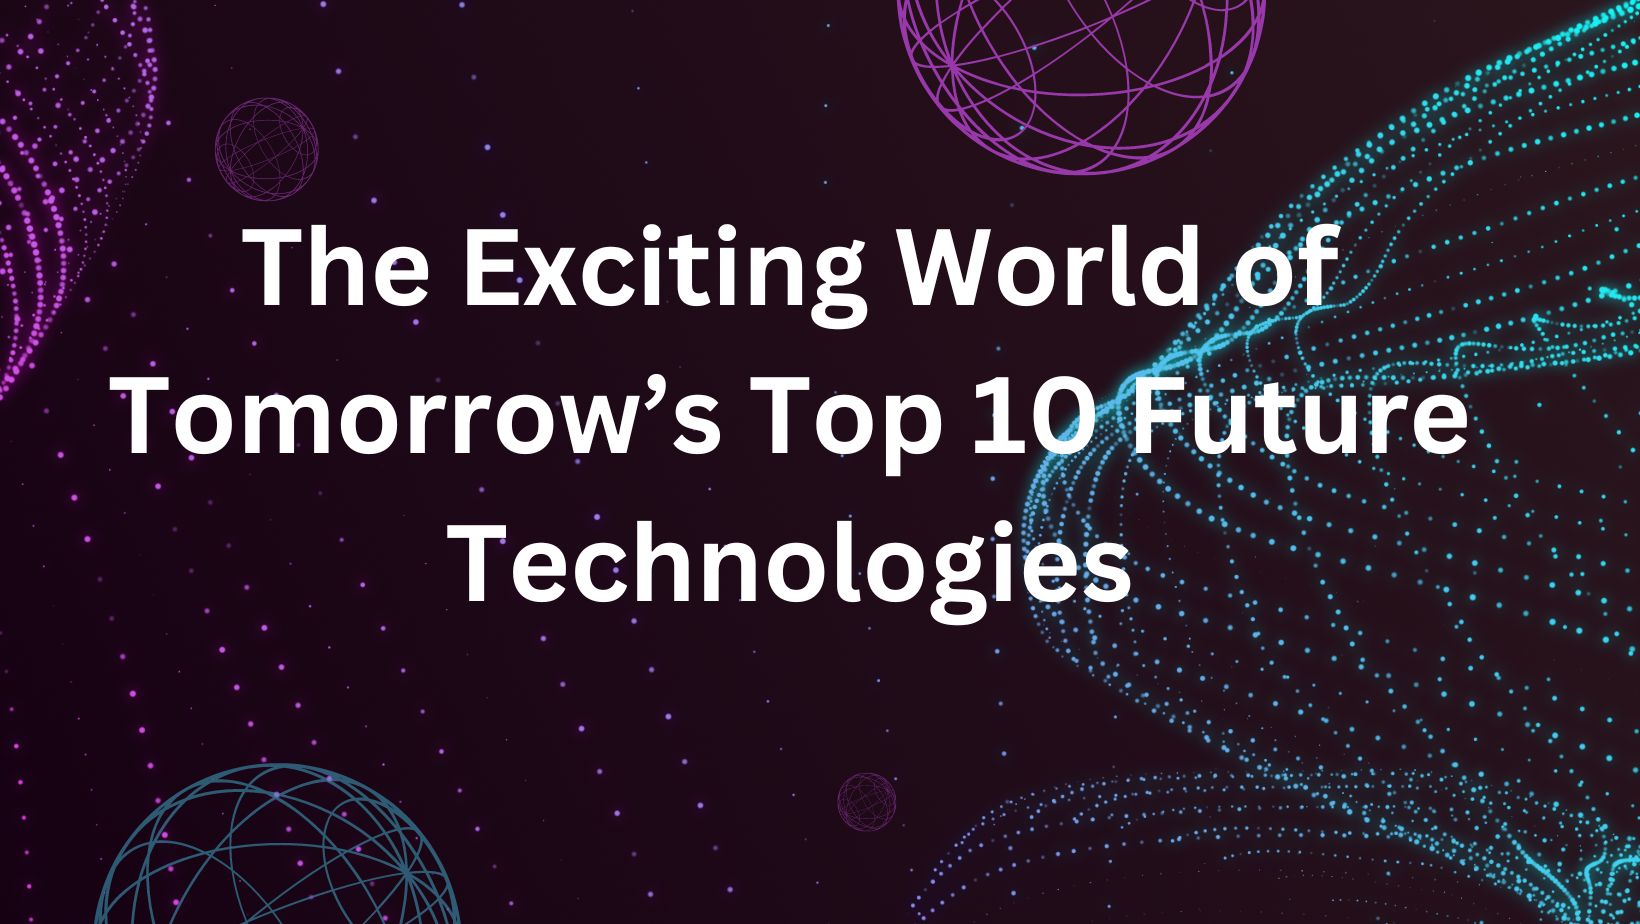 The Exciting World of Tomorrows Top 10 Future Technologies